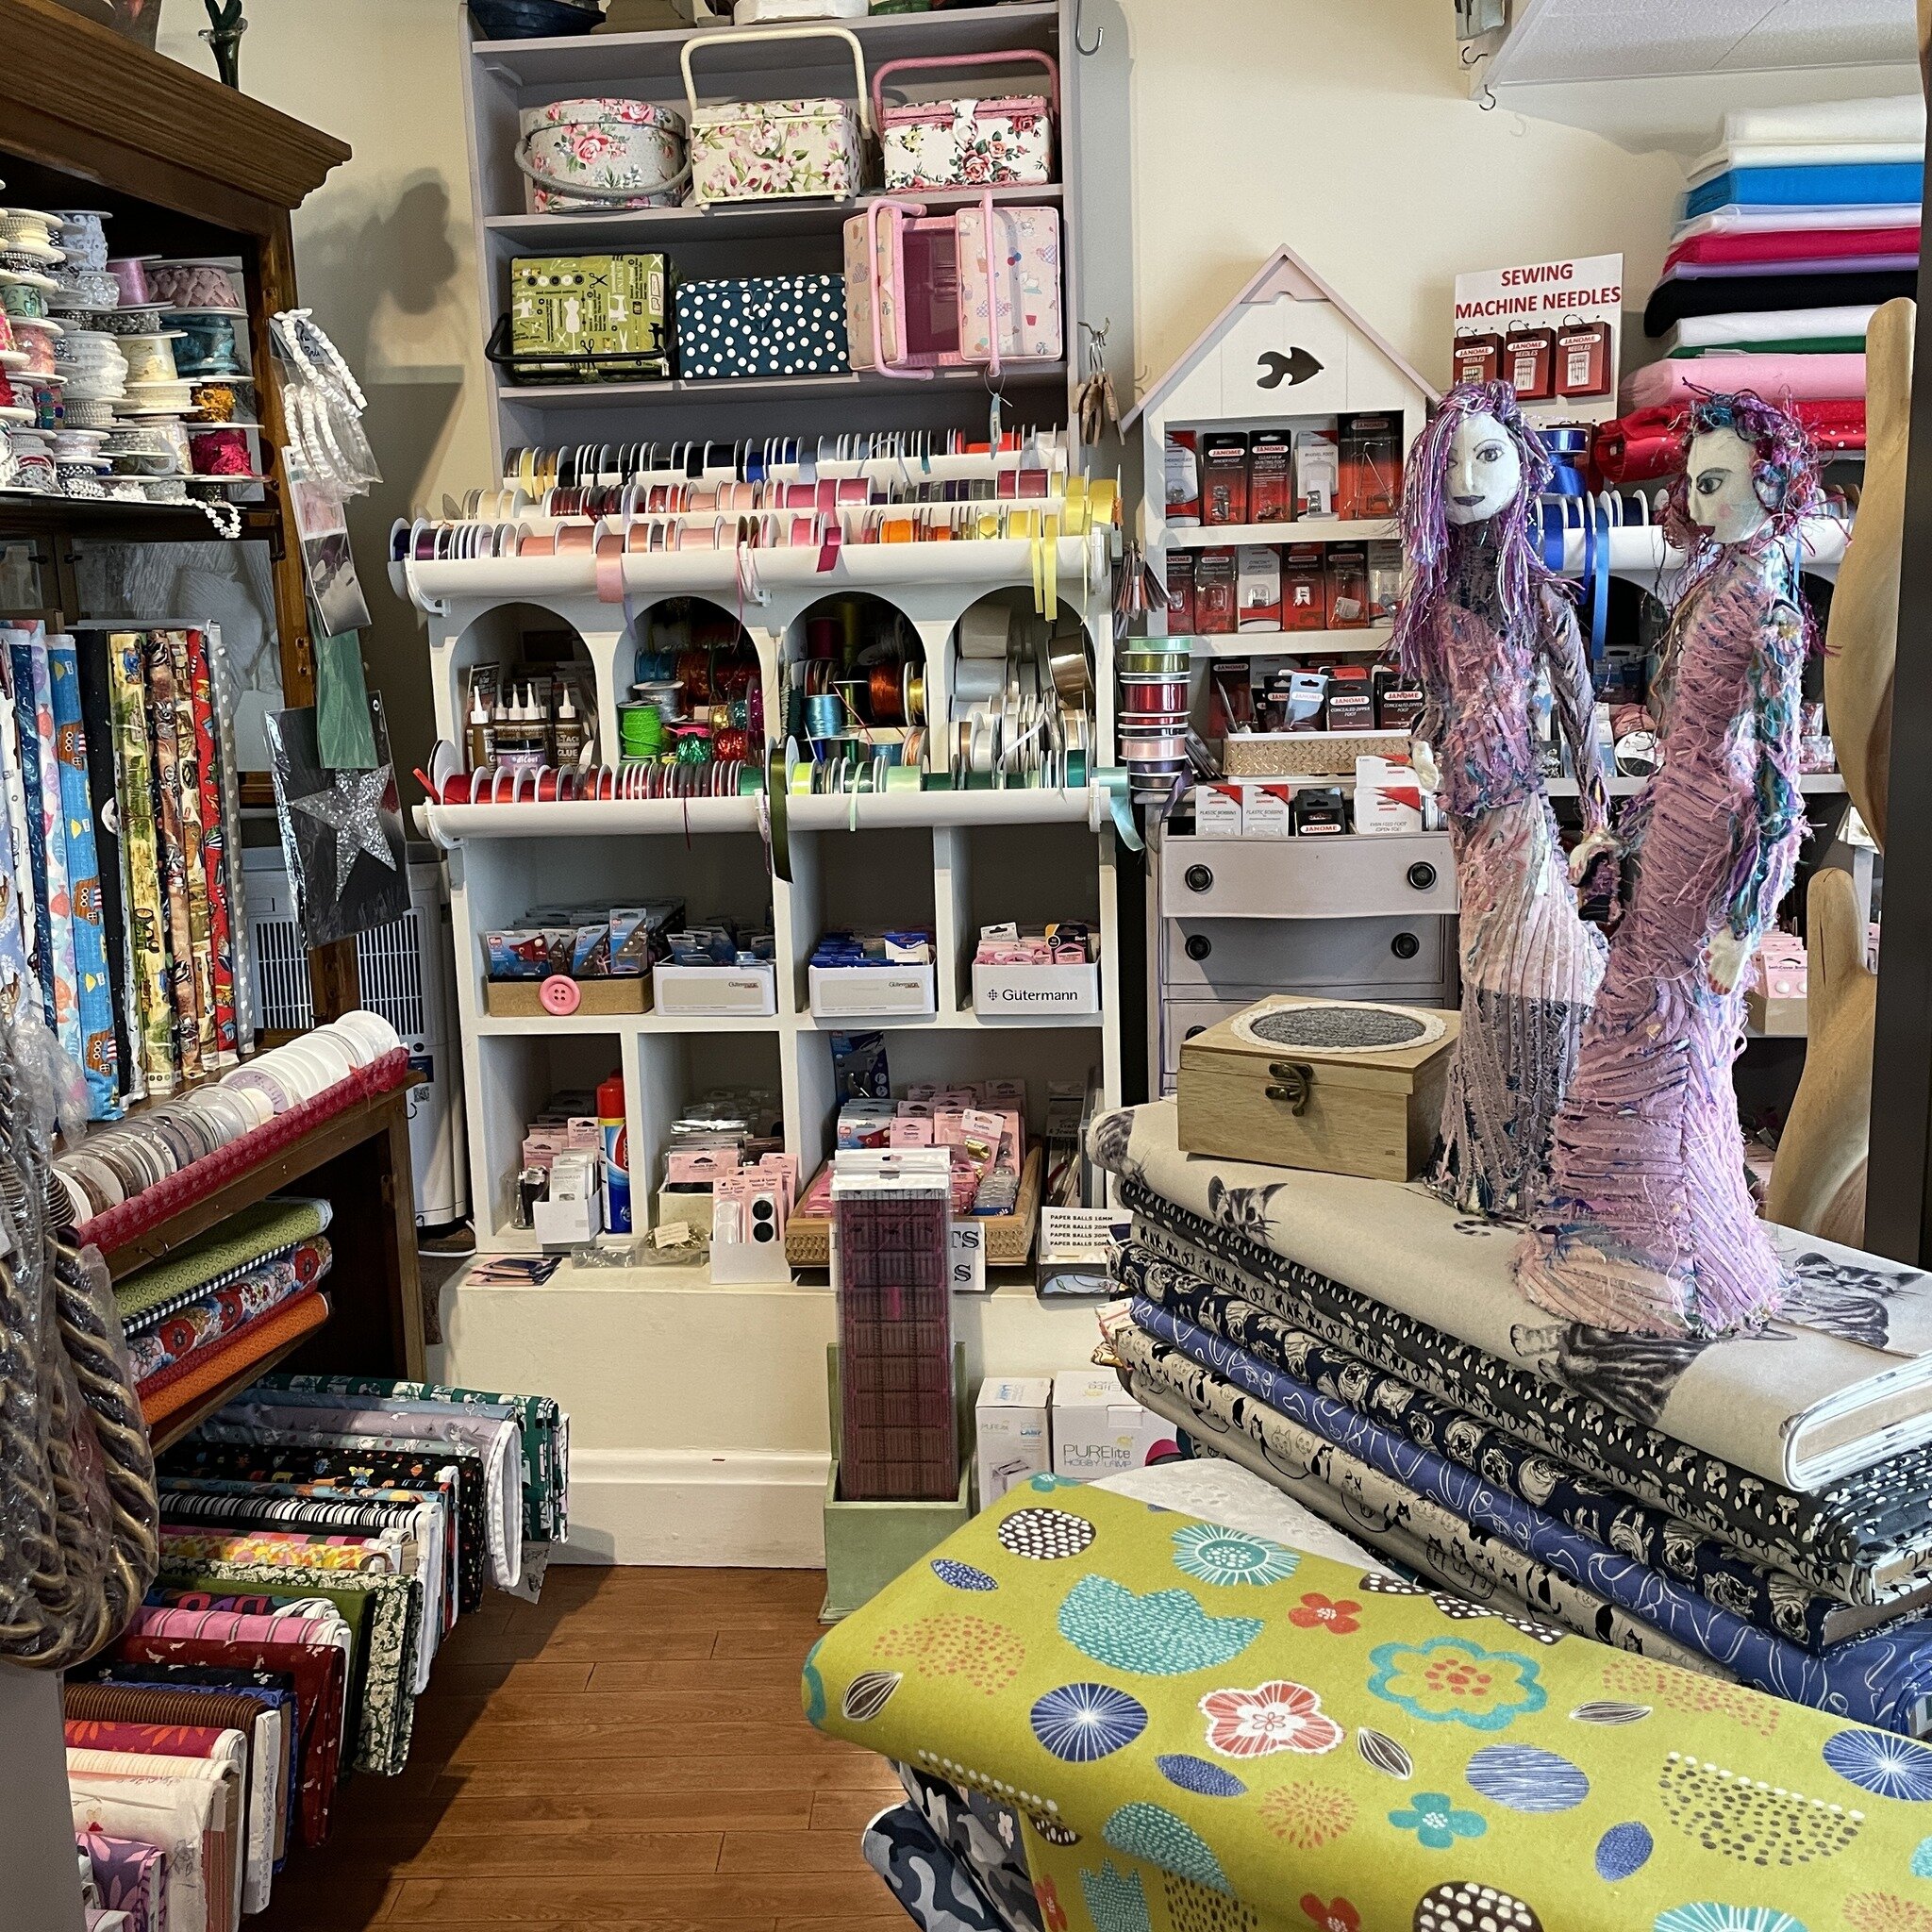 Love st Helier, Love Colomberie. There is a fabulous write up about Colomberie in the latest Town Crier Magazine pages 42-45  https://sthelier.je/parish-magazine/
The shop is open tomorrow 10-12.30 if you want to drop by.  Rachel should have a few co